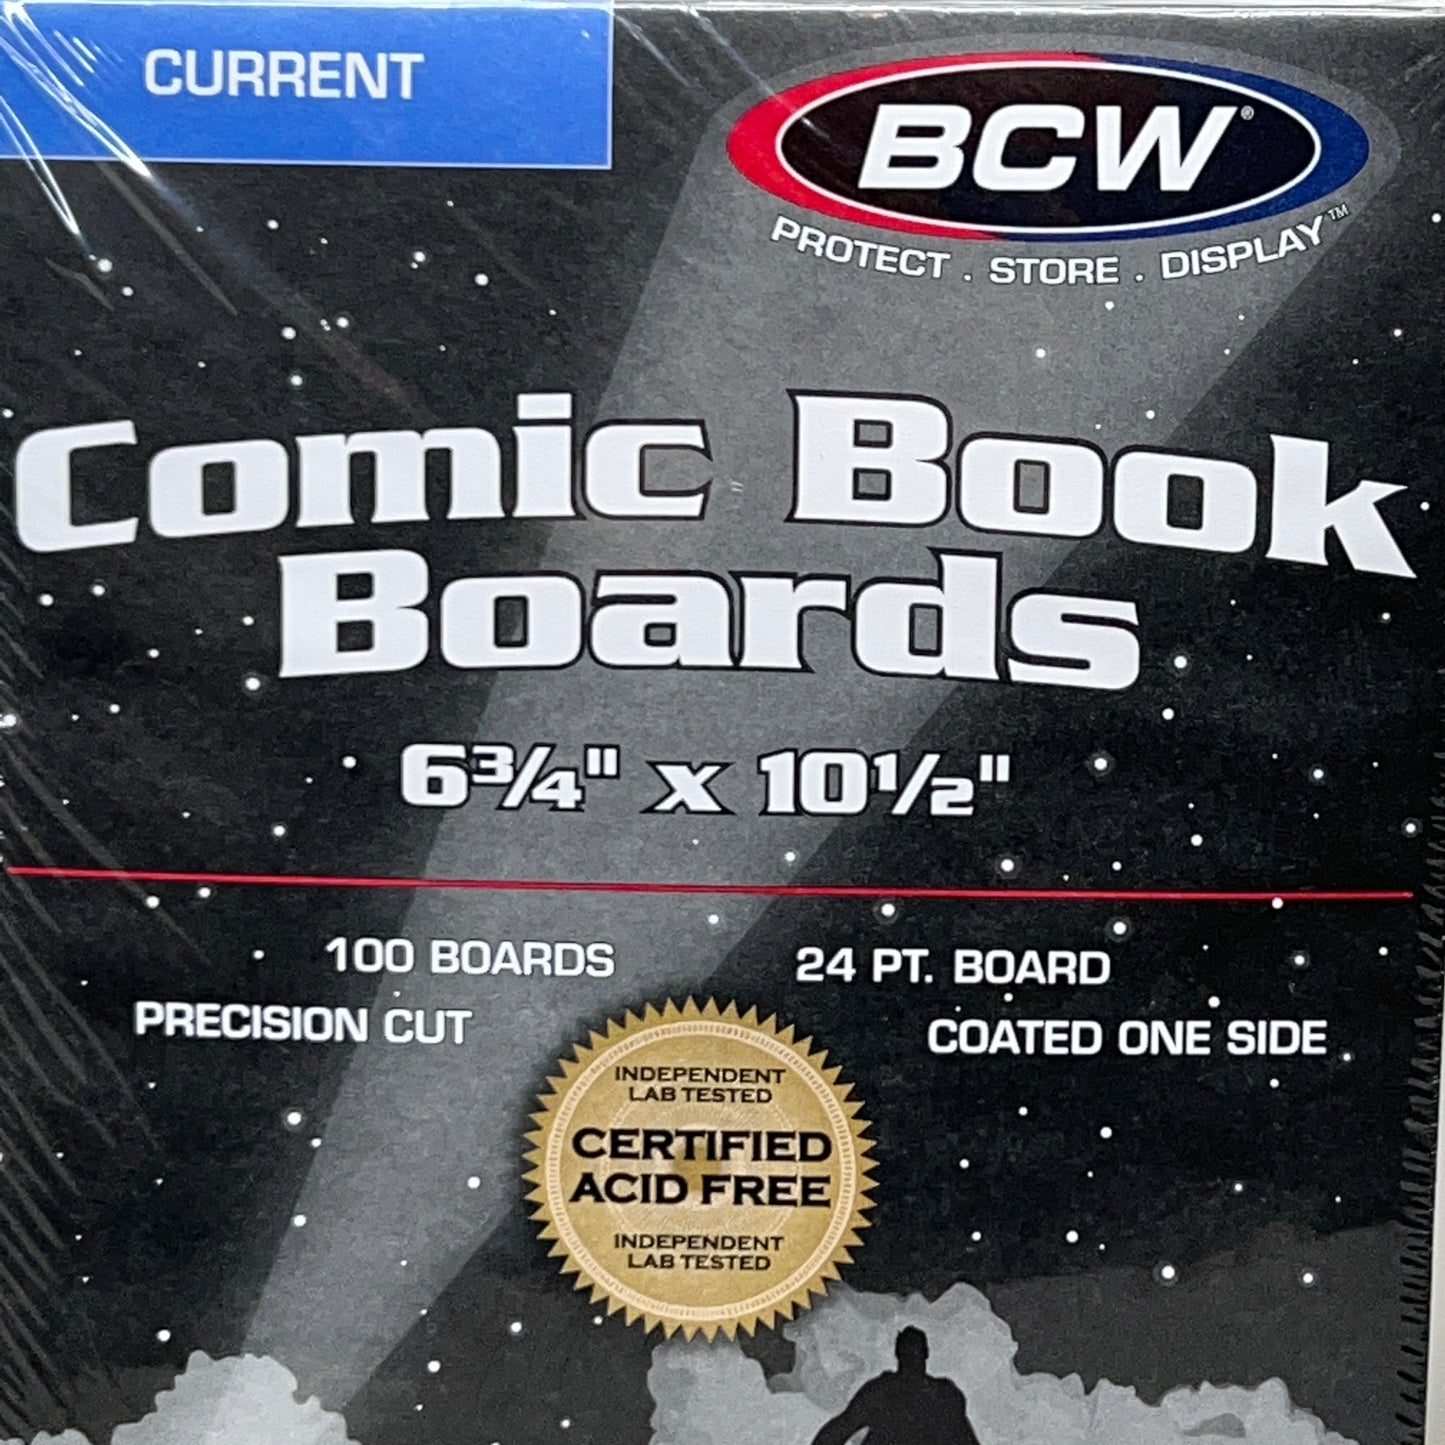 BCW Comic Book Boards 100-PACK CURRENT Precision Cut 1-BBCUR (New)